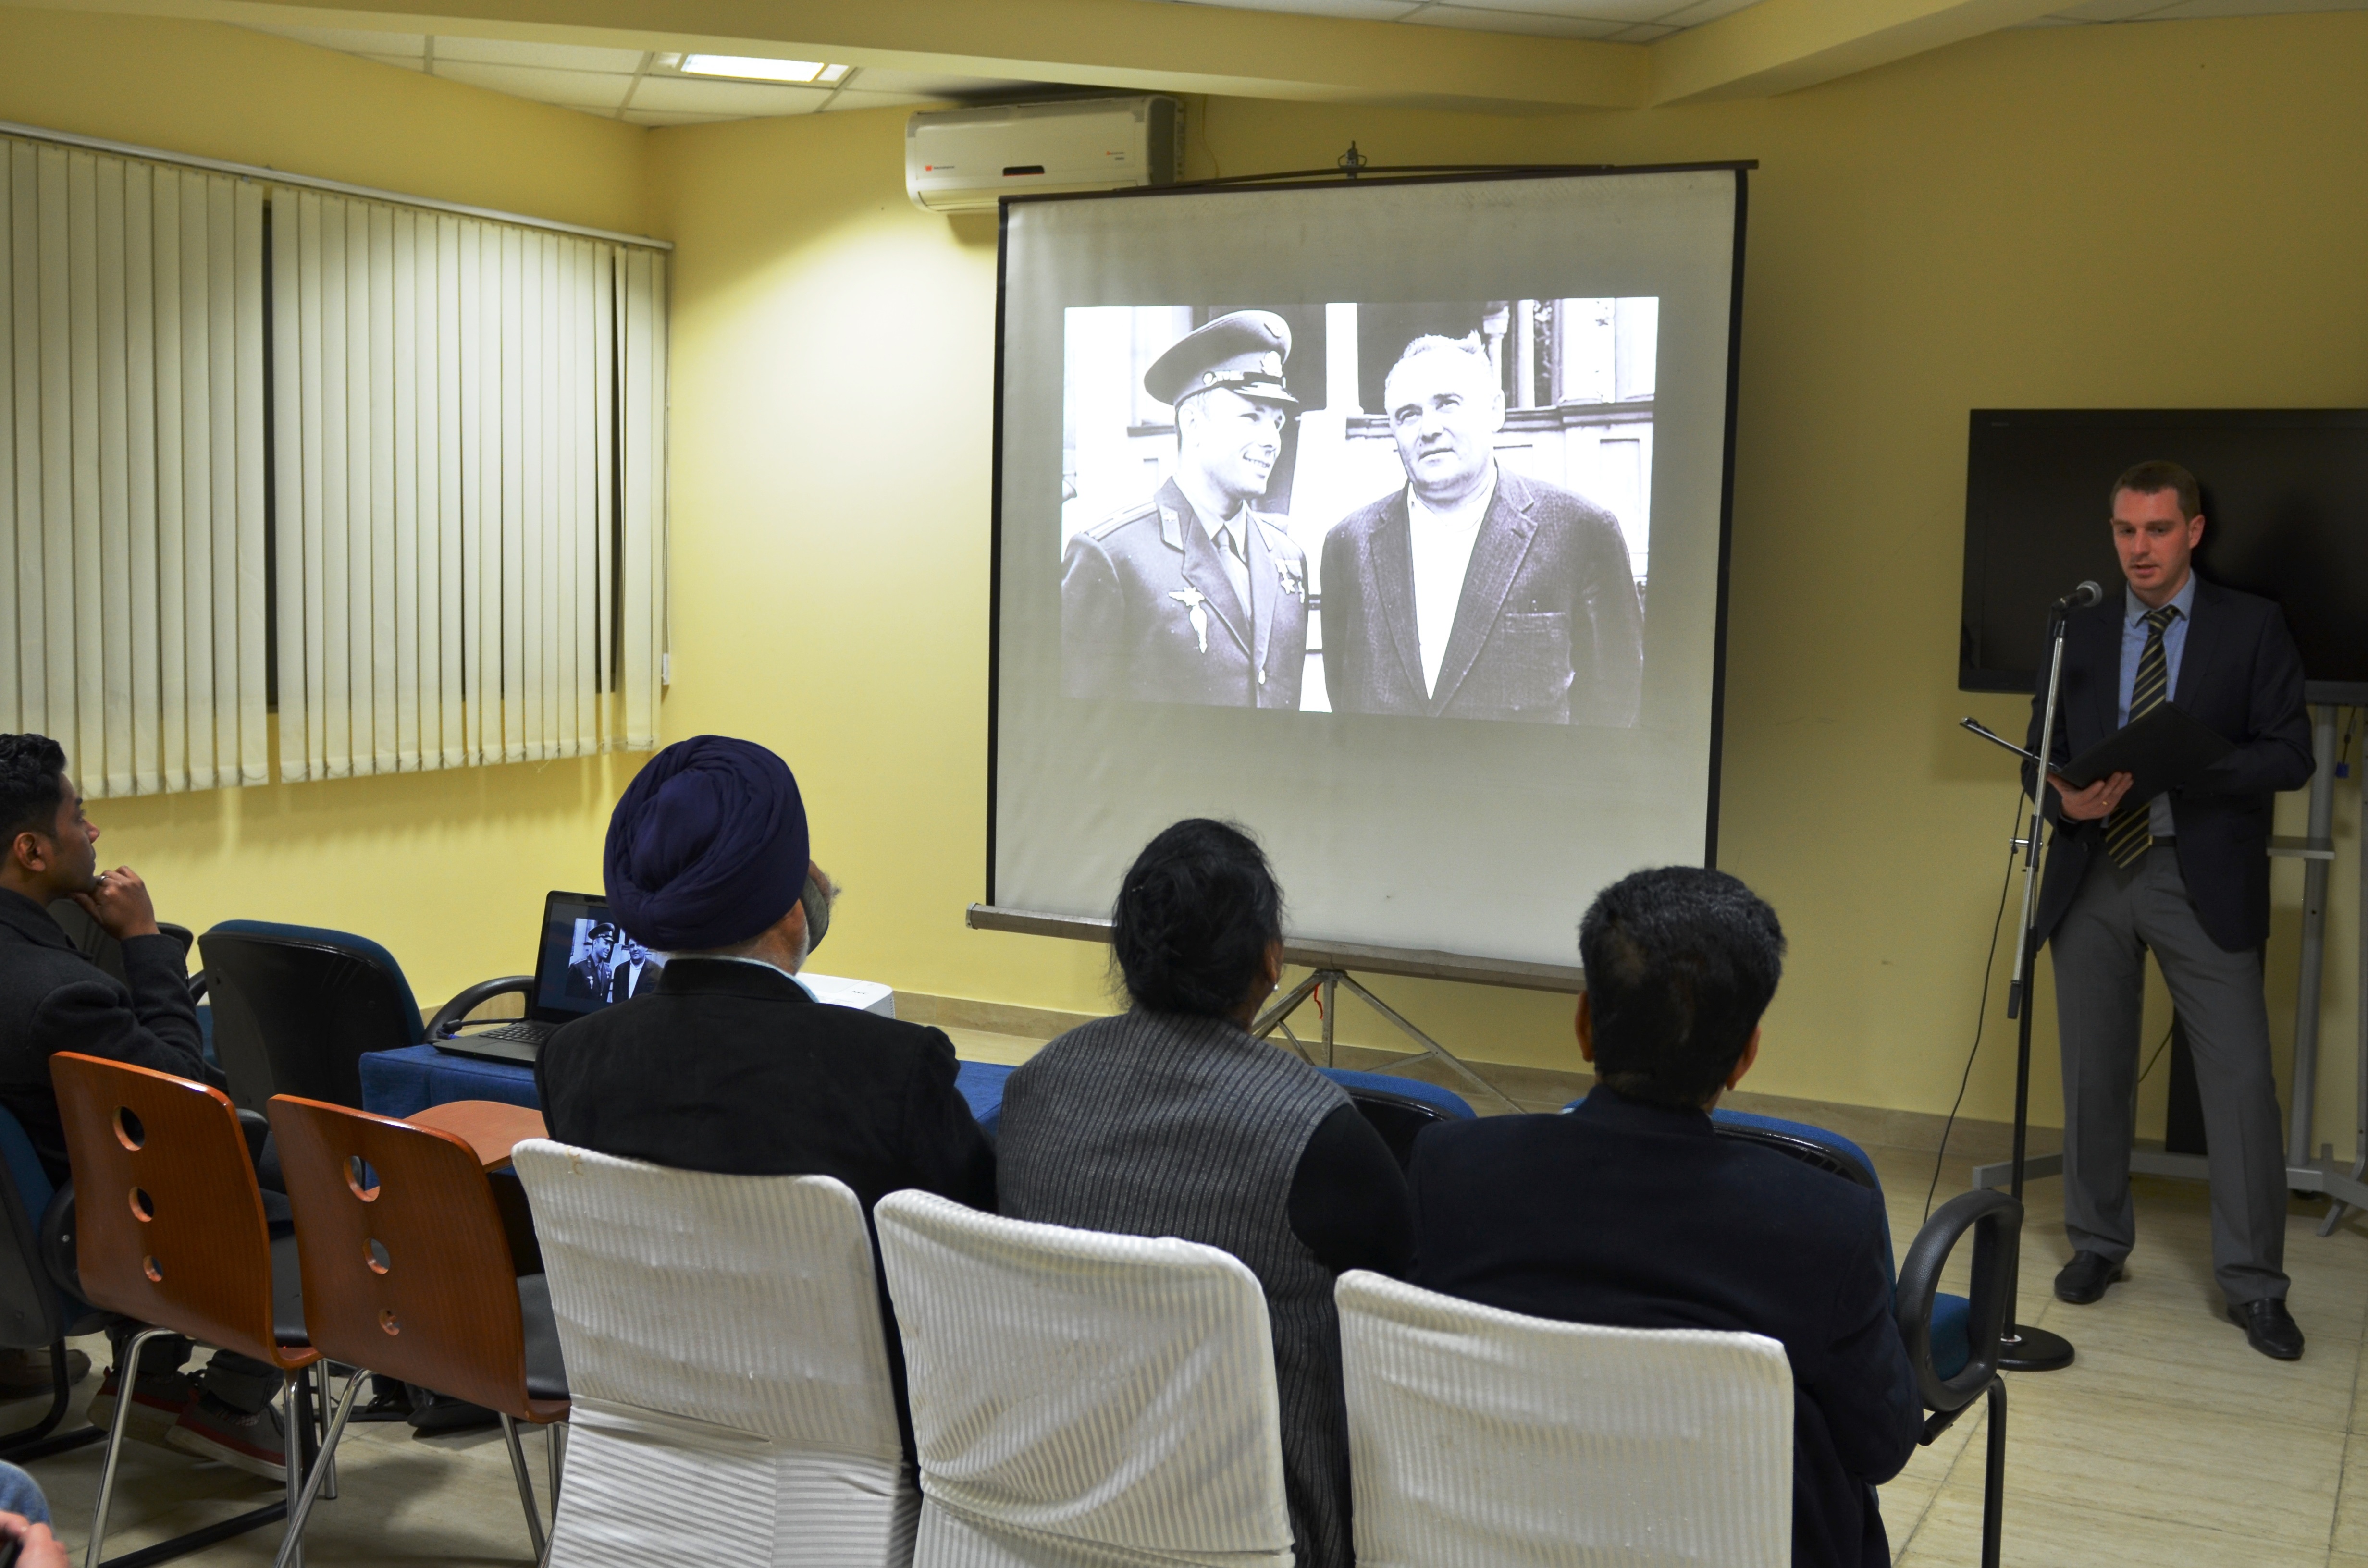 Two documentaries about Sergei Korolev were shown at the RCSC in New Delhi.